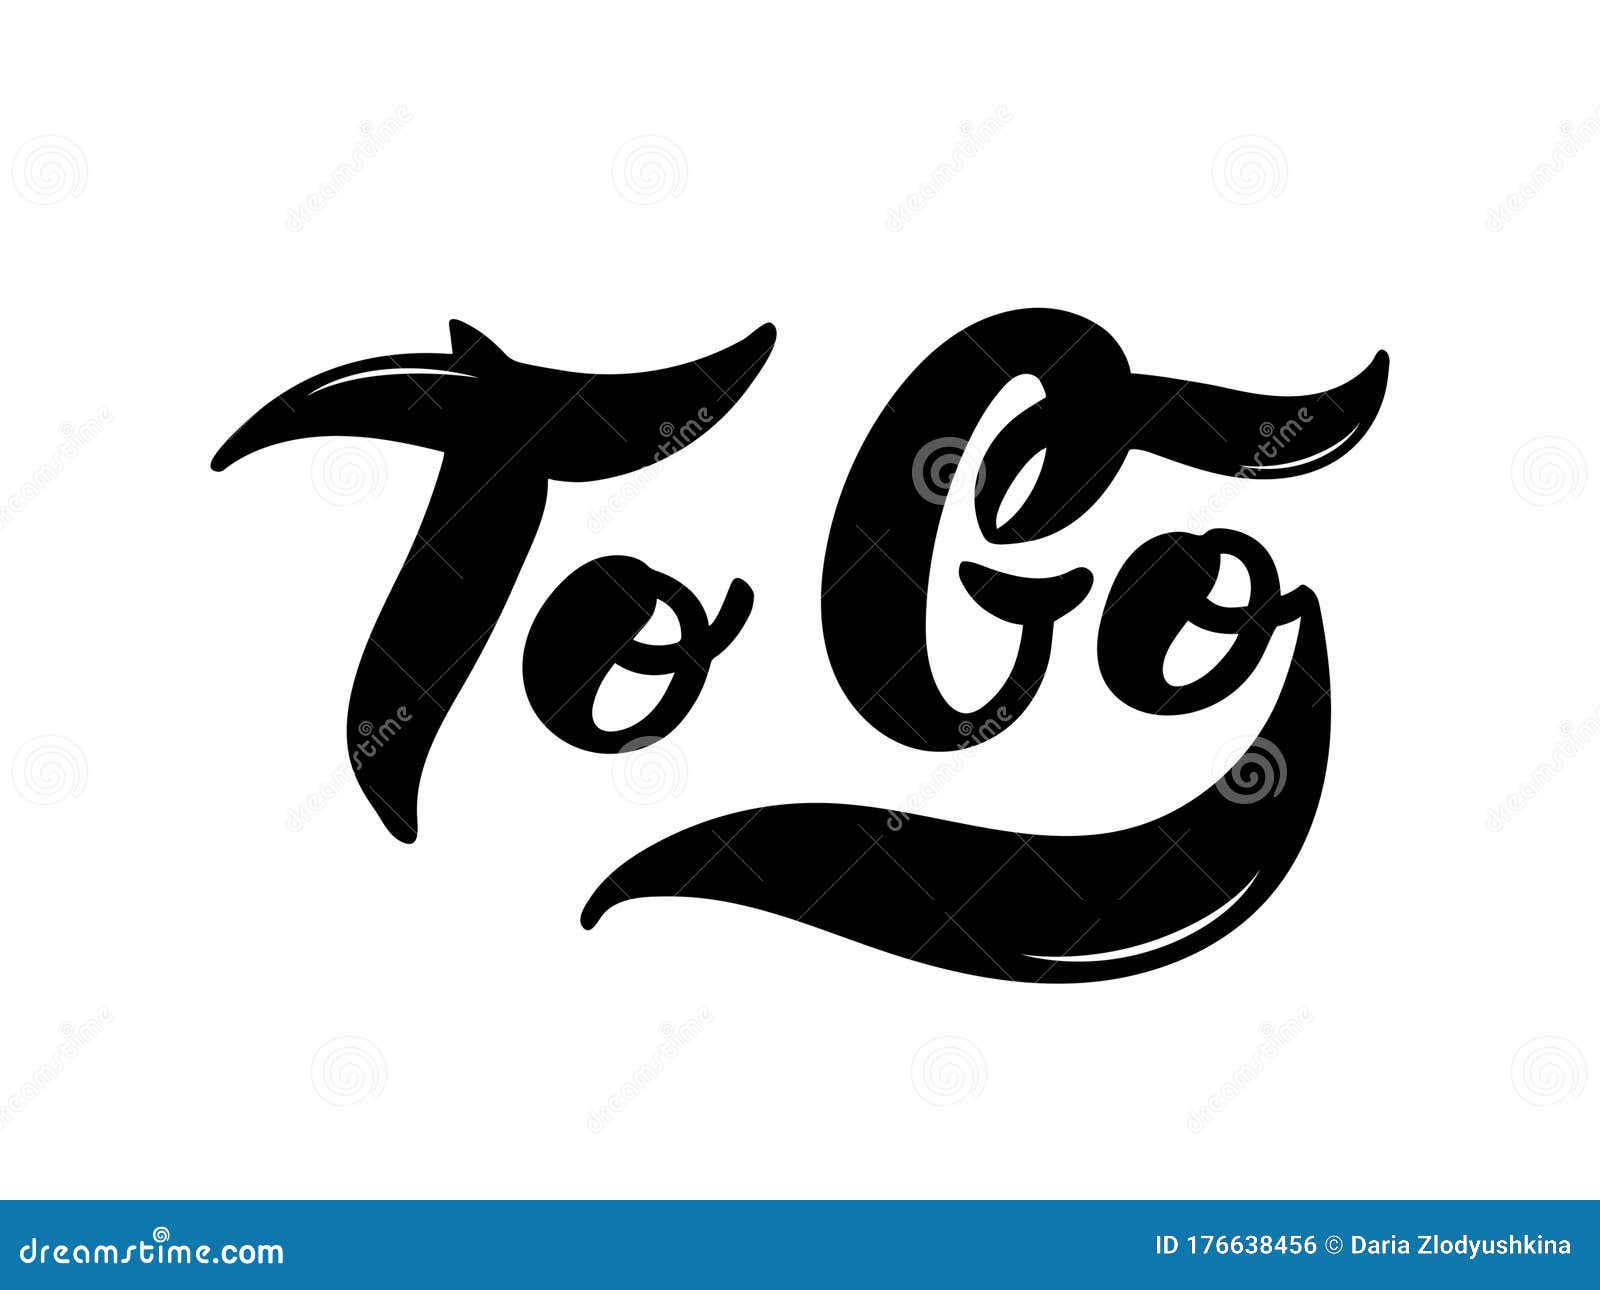 to go. the name of the type of coffee. hand drawn lettering.  illustra. the name of the type of coffee. hand drawn lettering